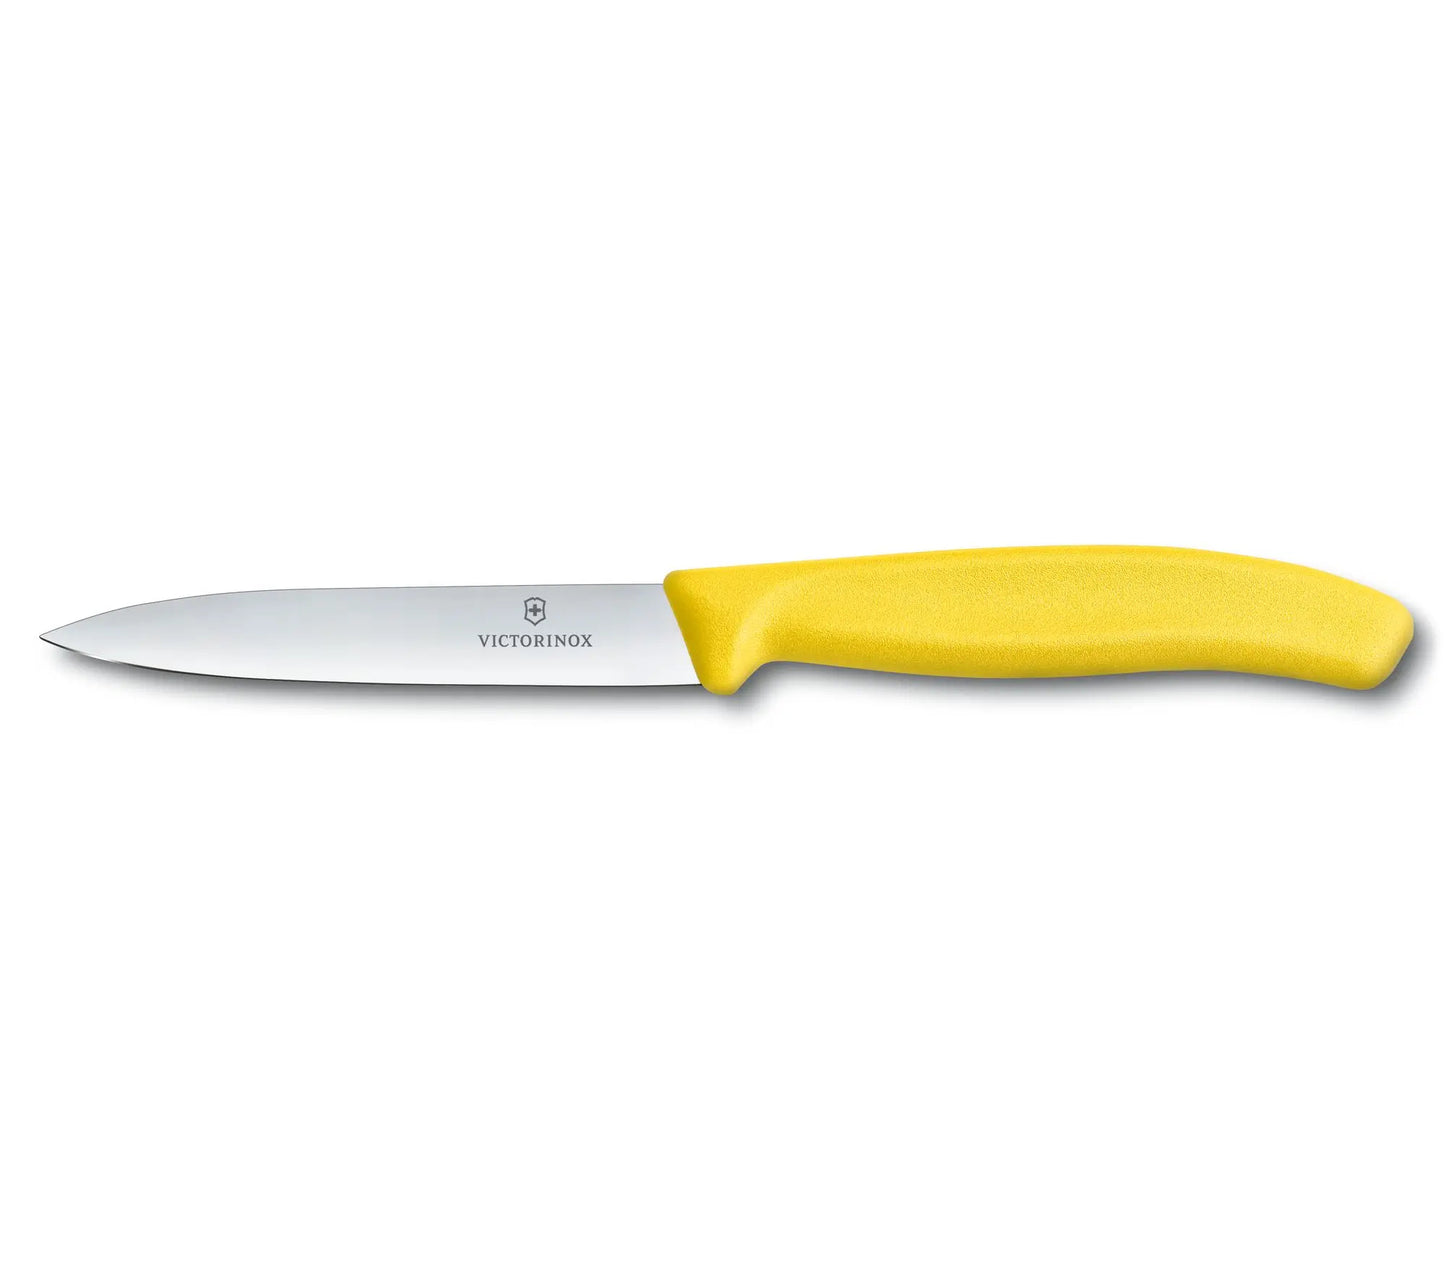 Victorinox Swiss Classic Paring Knife Pointed Tip - Yellow